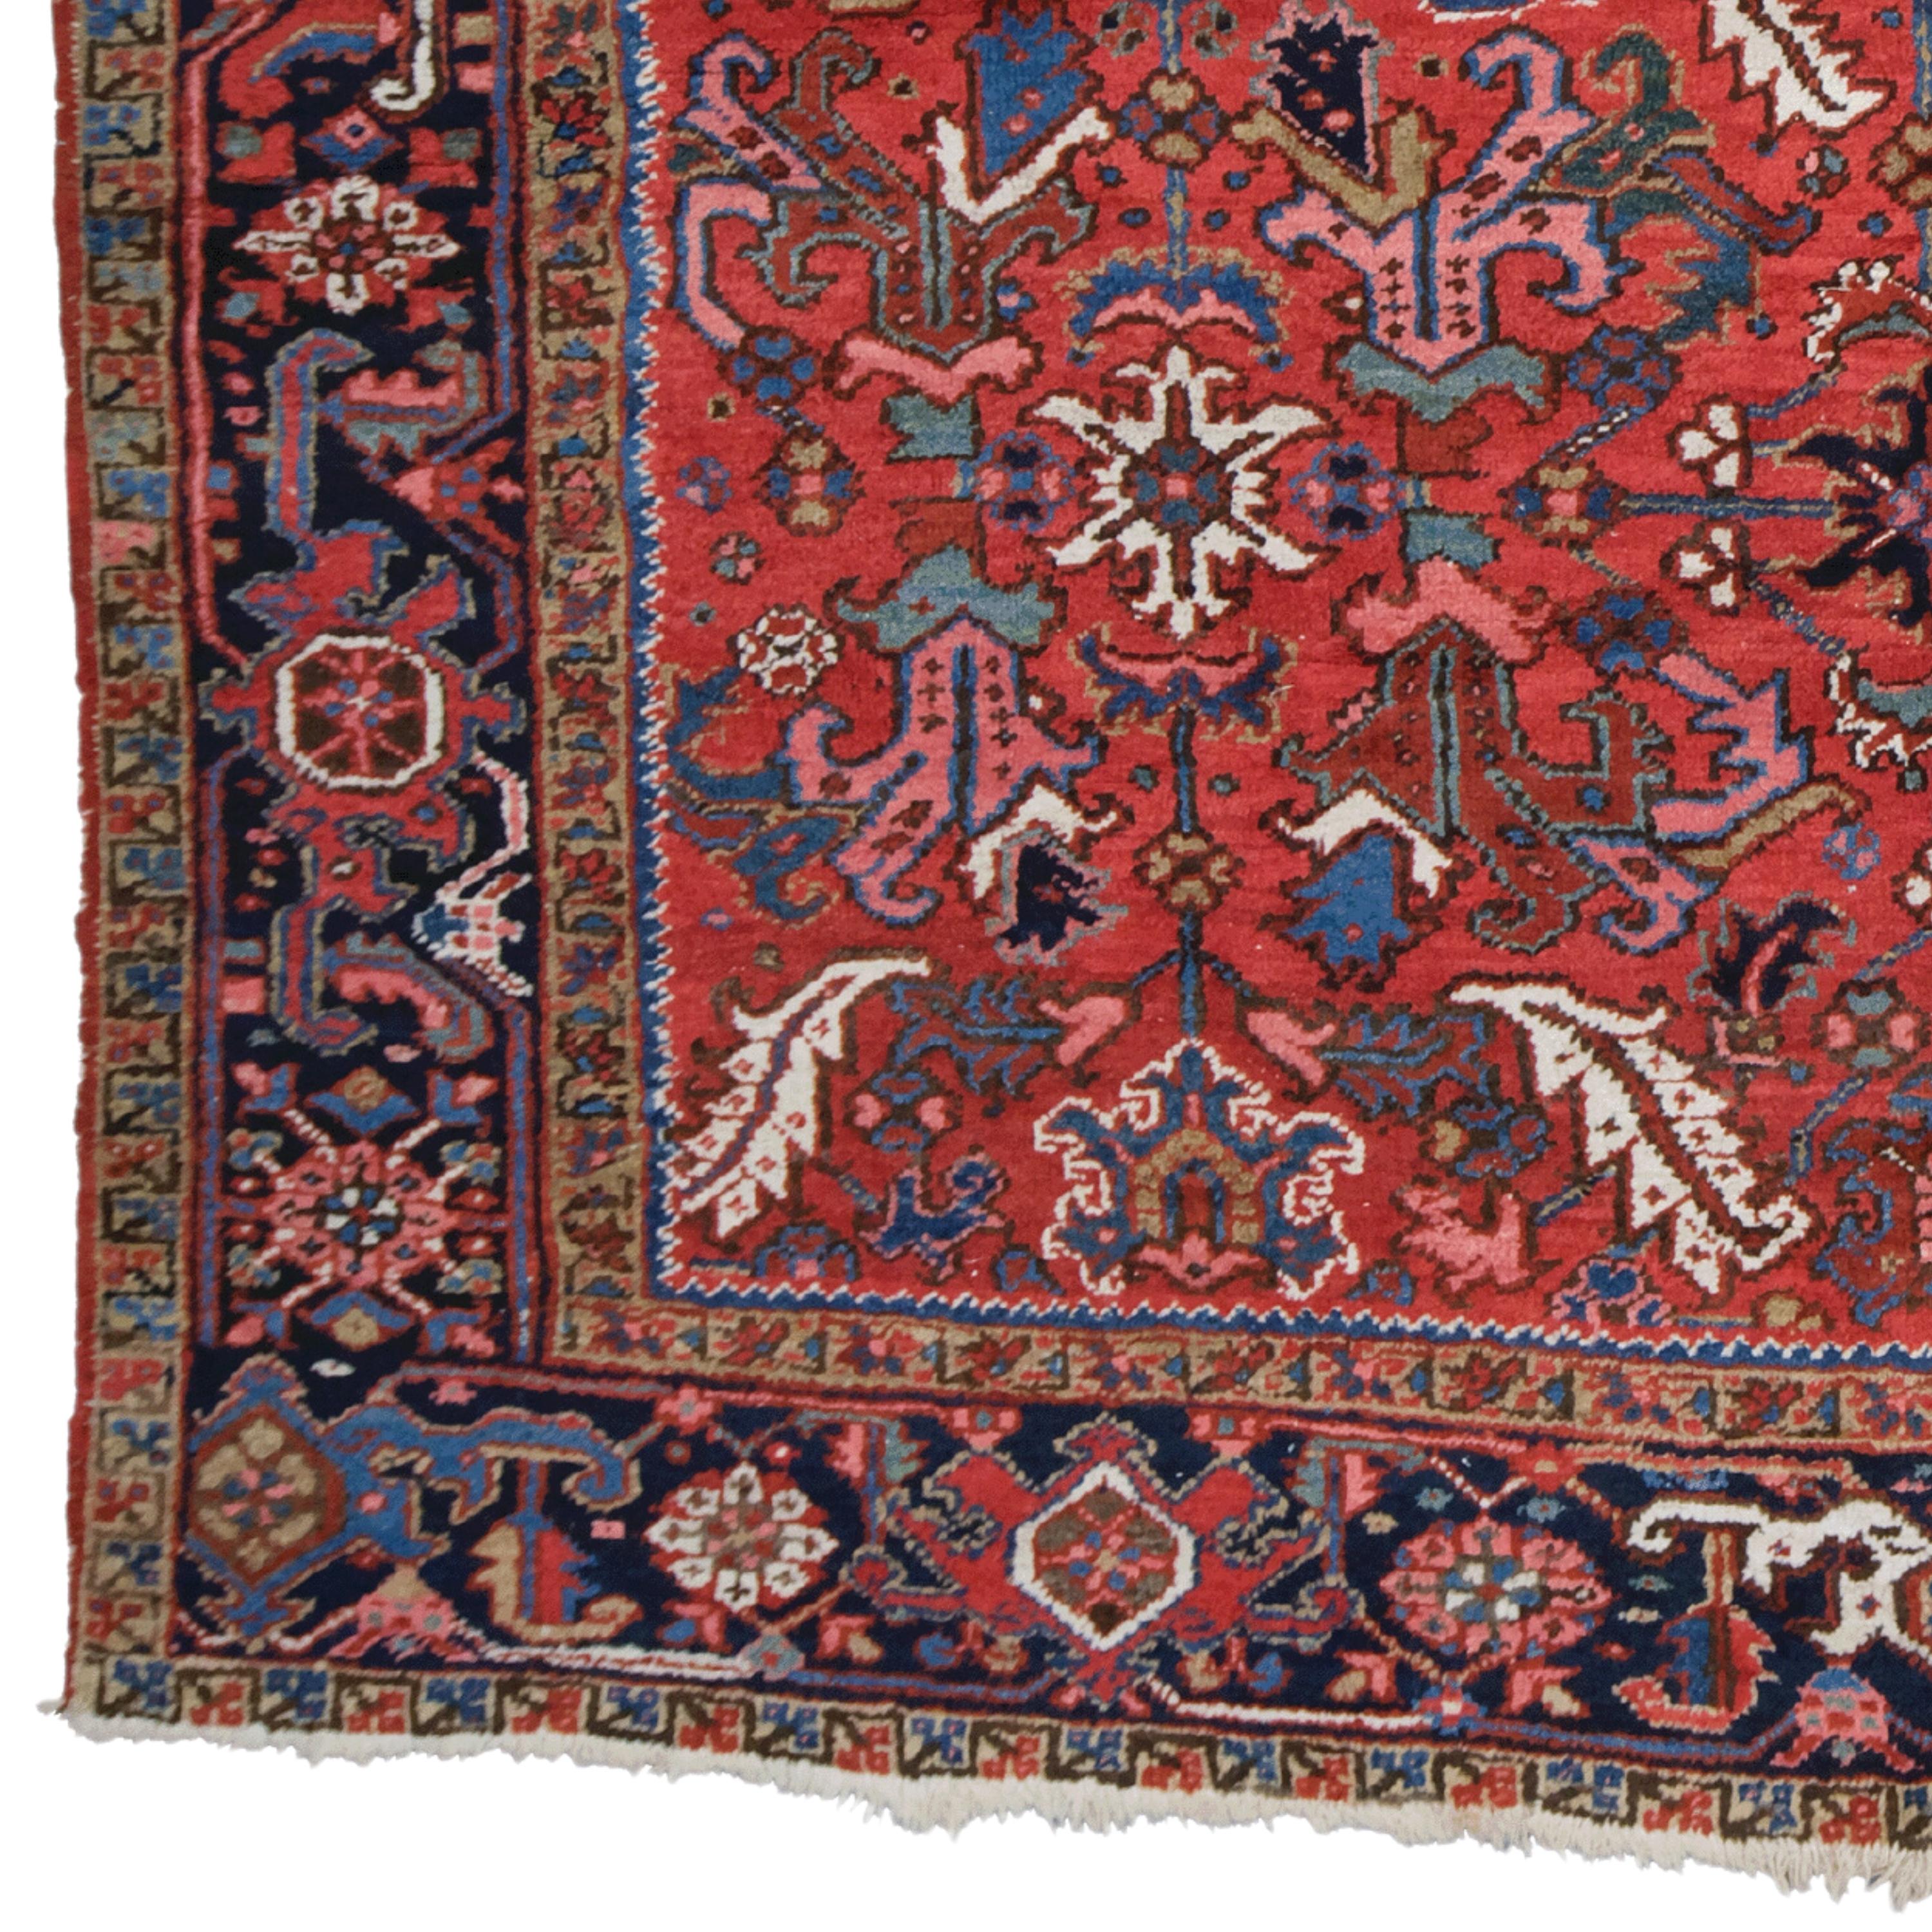 This breathtaking carpet will fascinate you with its intricate designs and vibrant colors that reflect the rich history and craftsmanship of the period. Each stitch tells the story of skilled craftsmen who masterfully crafted every detail. A rich